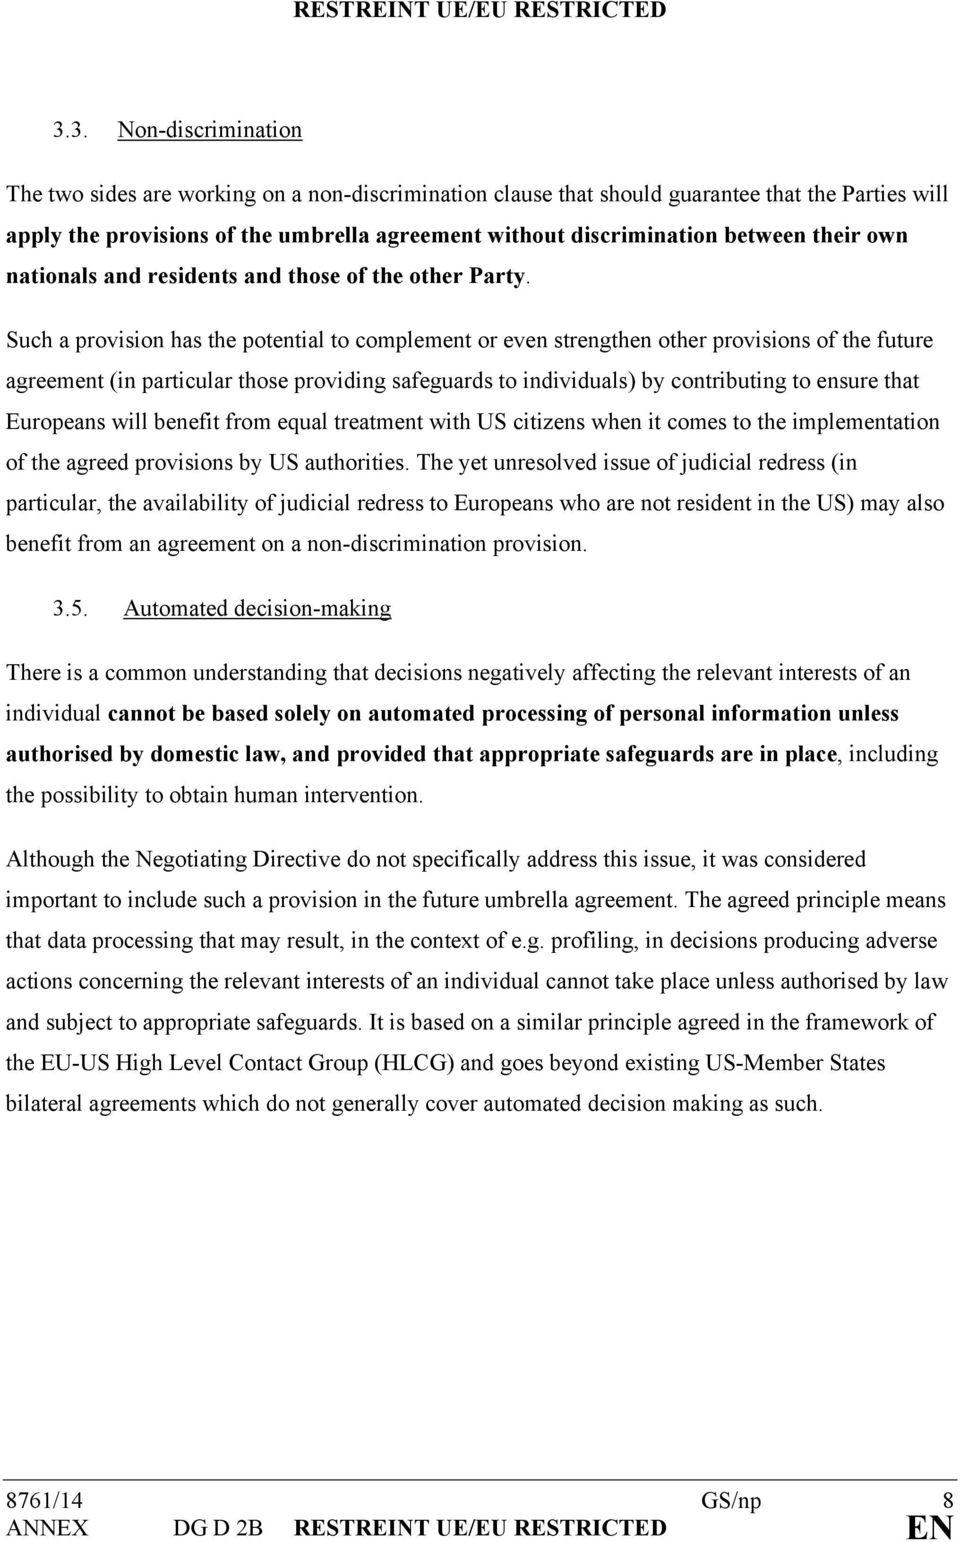 Such a provision has the potential to complement or even strengthen other provisions of the future agreement (in particular those providing safeguards to individuals) by contributing to ensure that